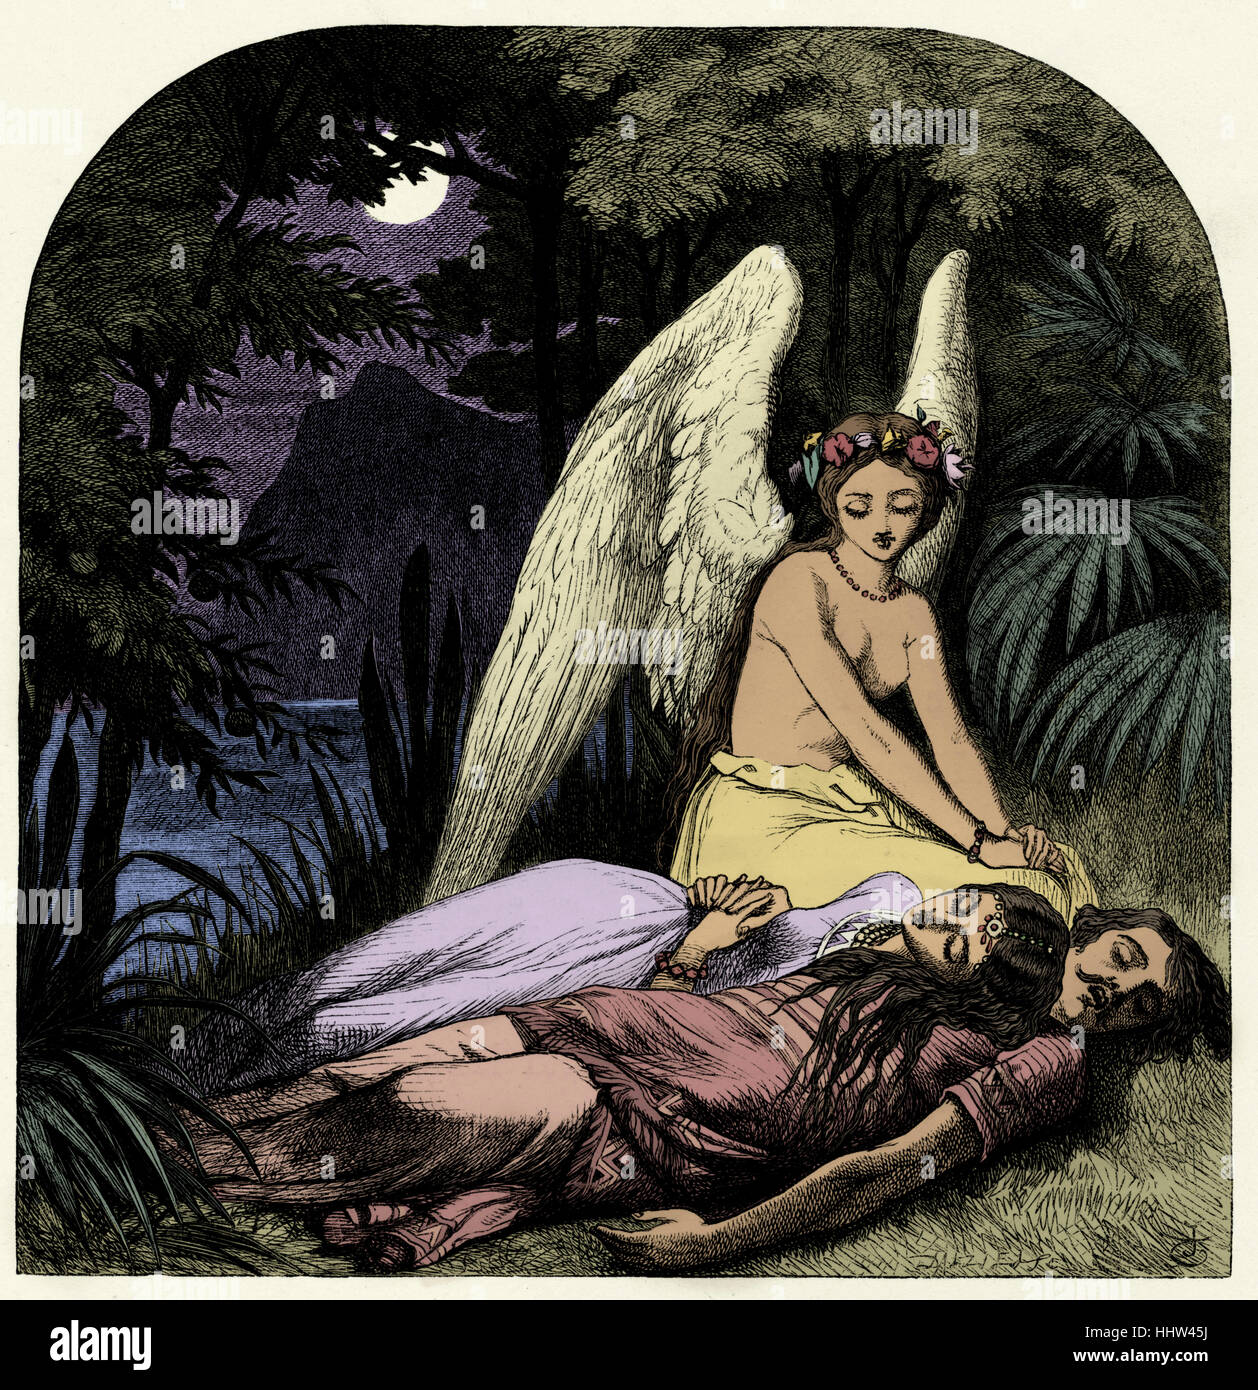 Paradise and the Peri - illustration from the book Lalla Rookh by Irish poet and writer Thomas Moore. An angel (Peri) sits Stock Photo